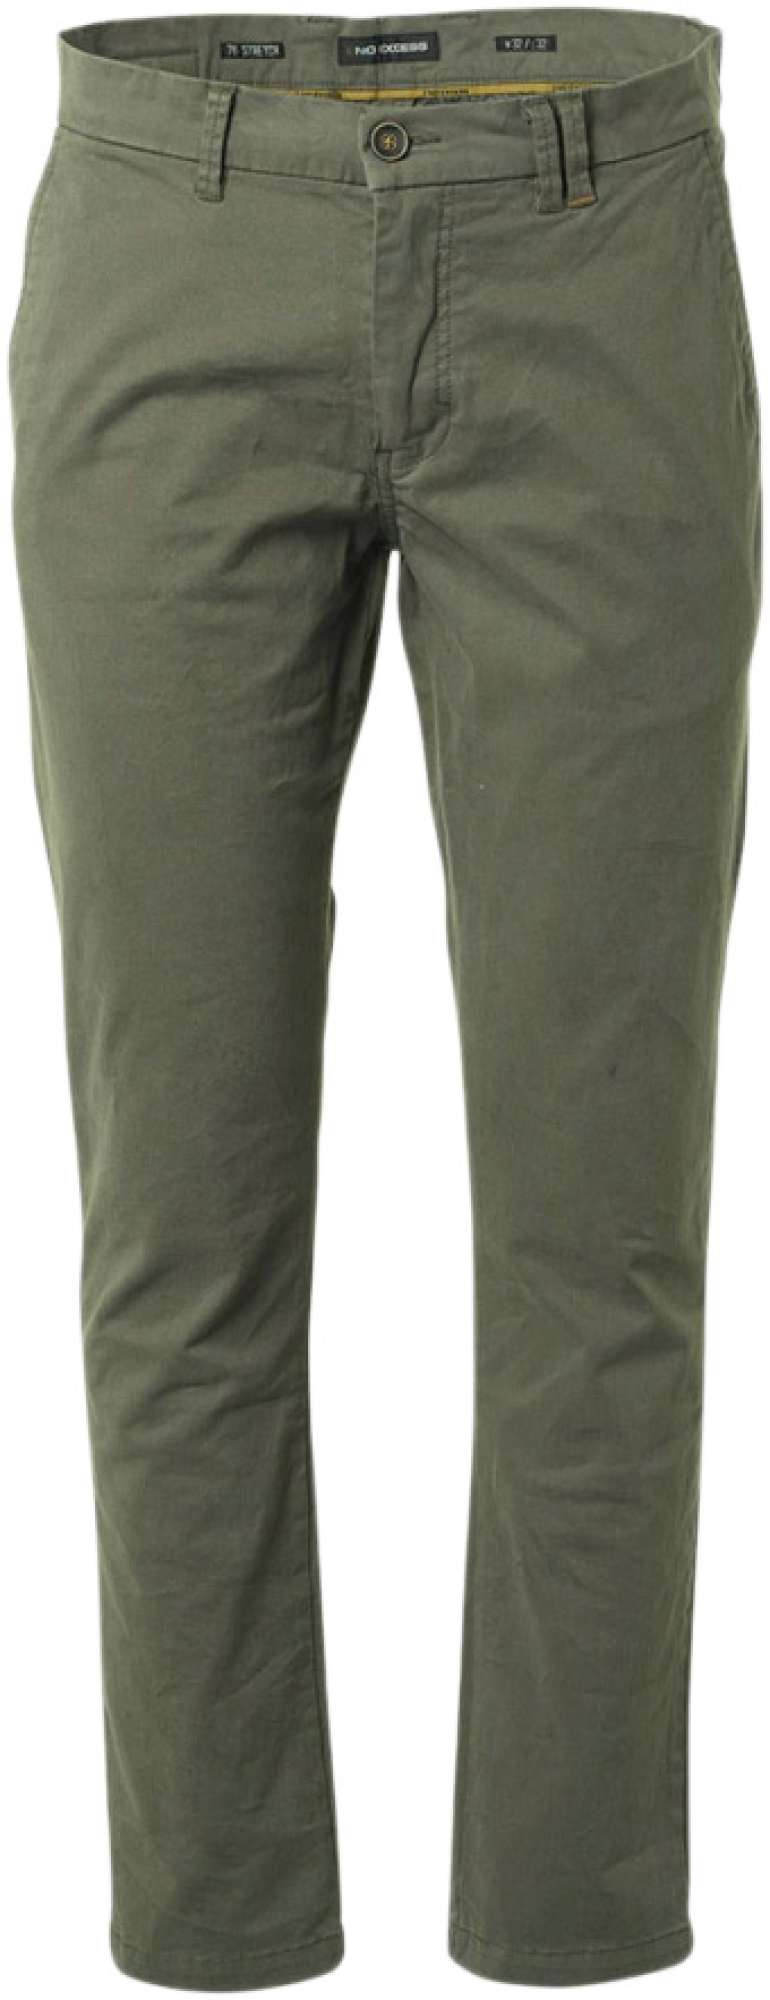 Afbeelding van No Excess Pants chino garment dyed stretch dark seagreen